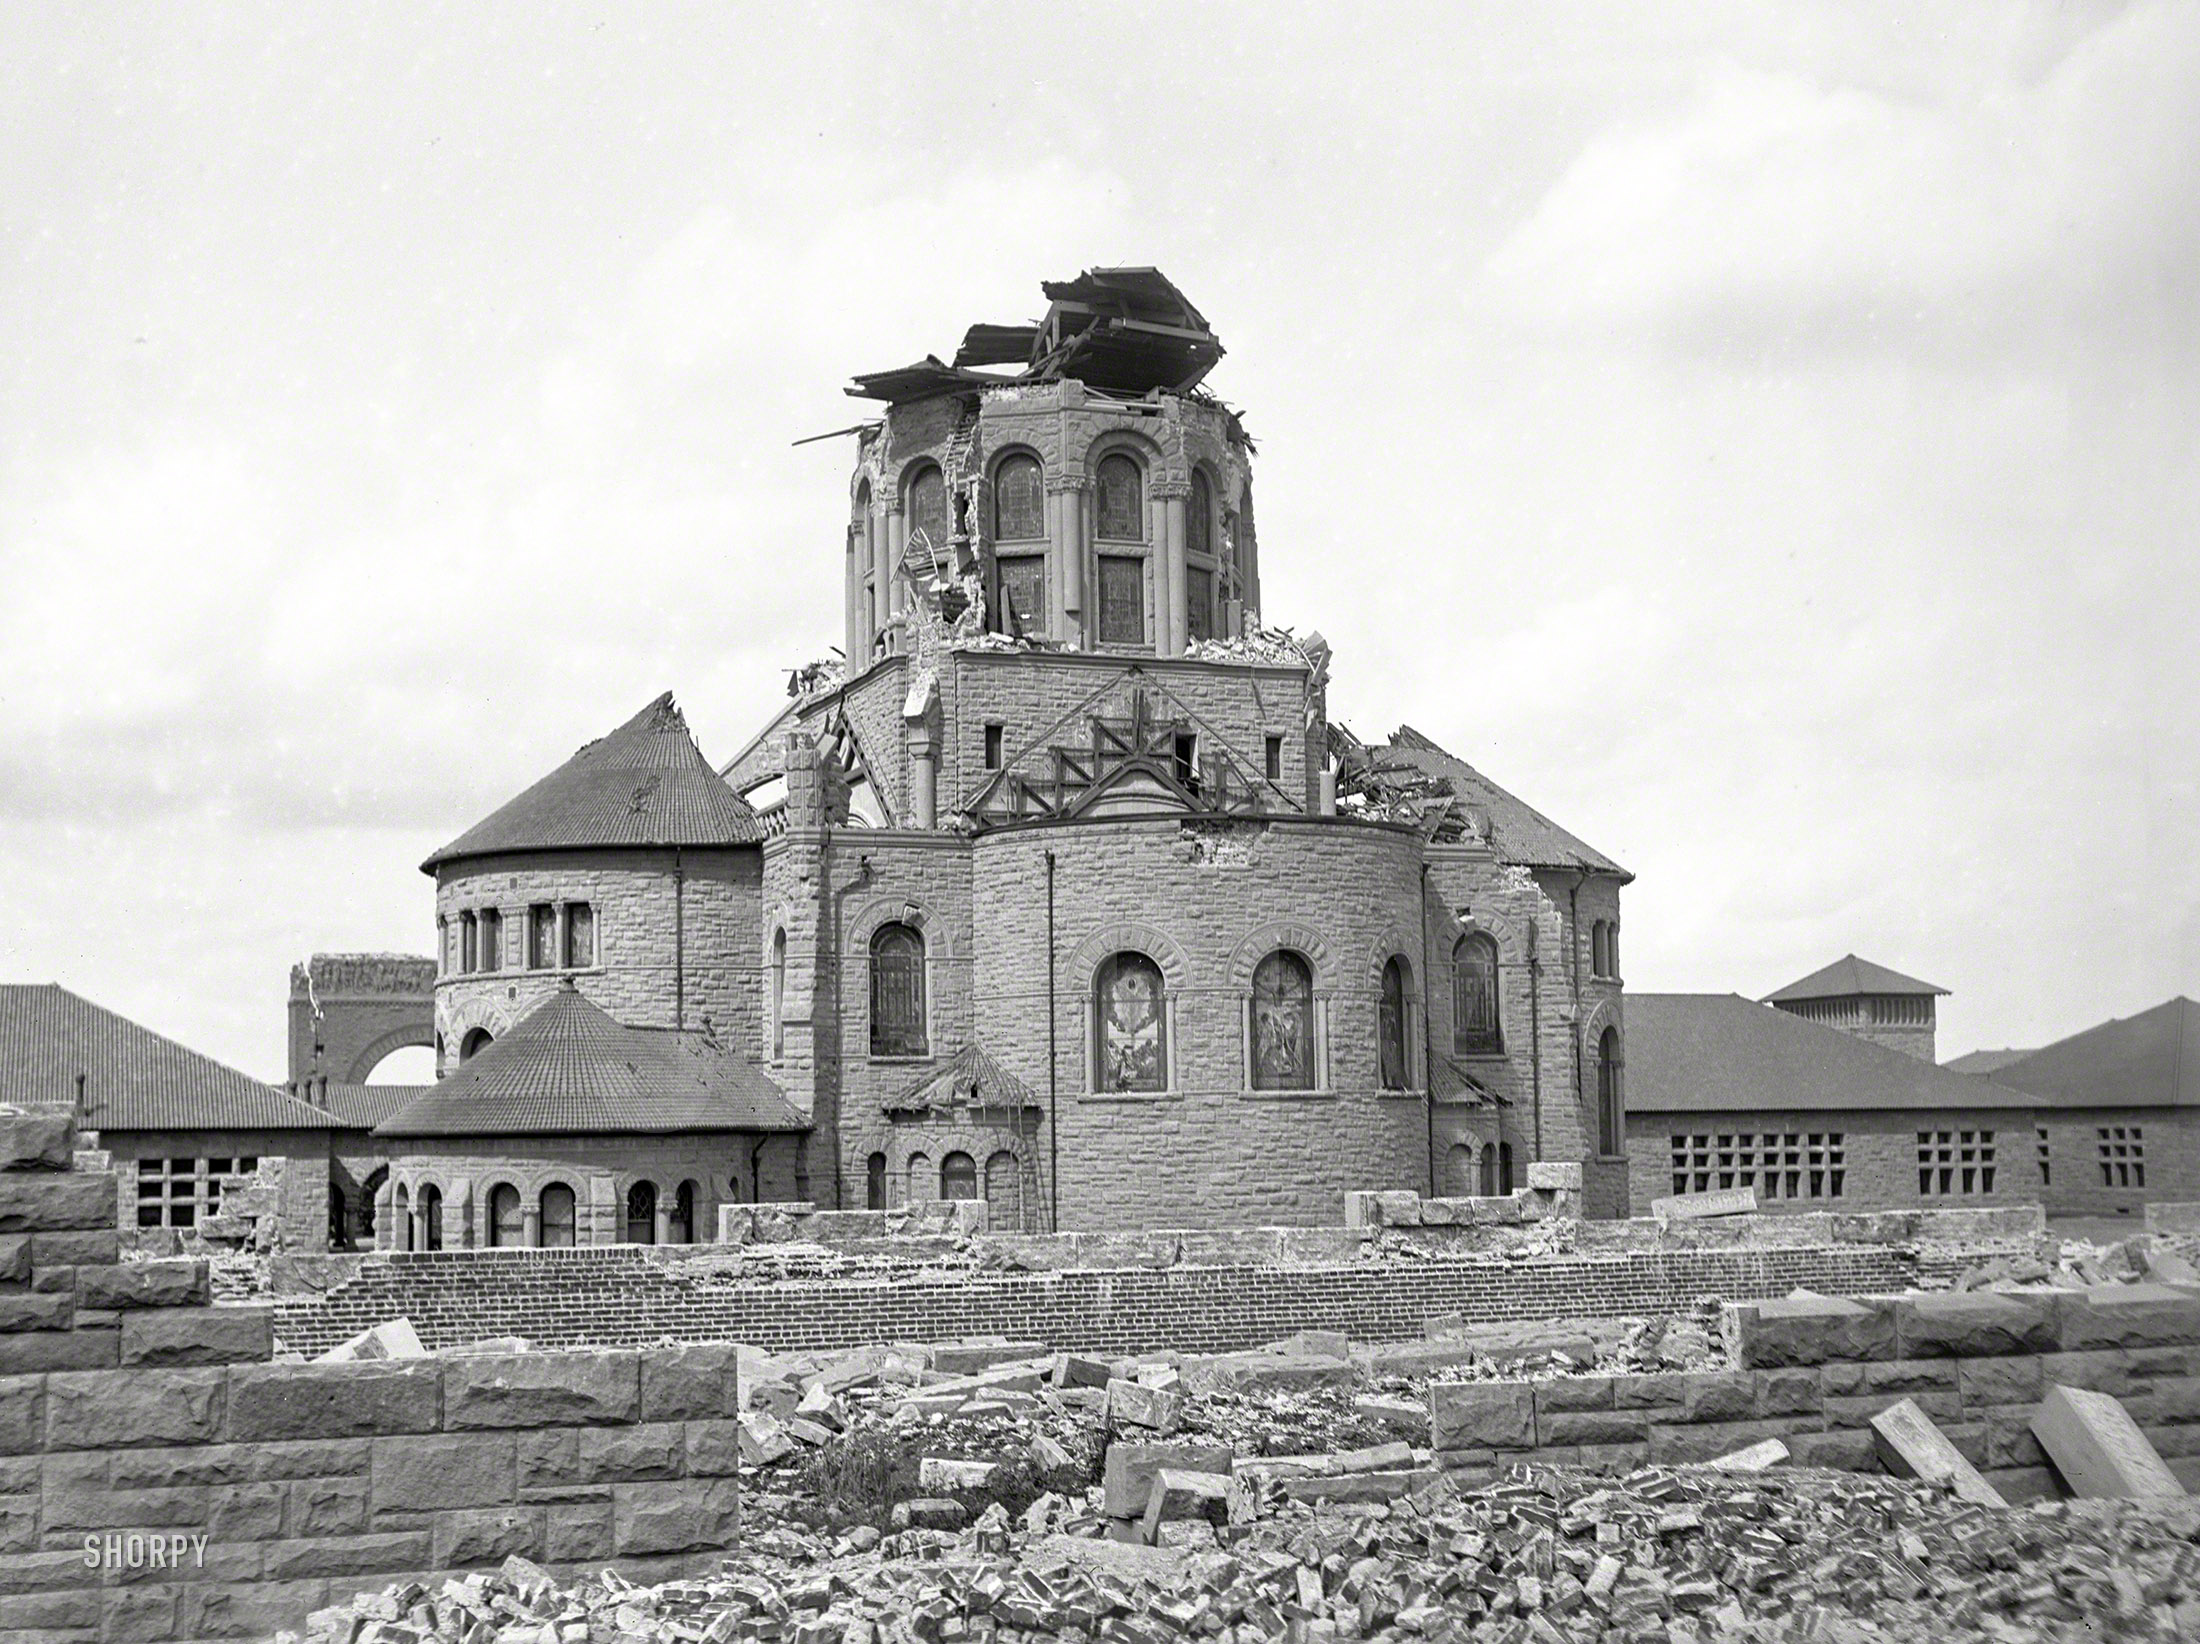 San Francisco, April 1906. "Memorial Church after earthquake." The chapel at Stanford University was eventually resurrected, but with significant alterations. The wrecked bell tower was never rebuilt. 5x7 glass negative. View full size.